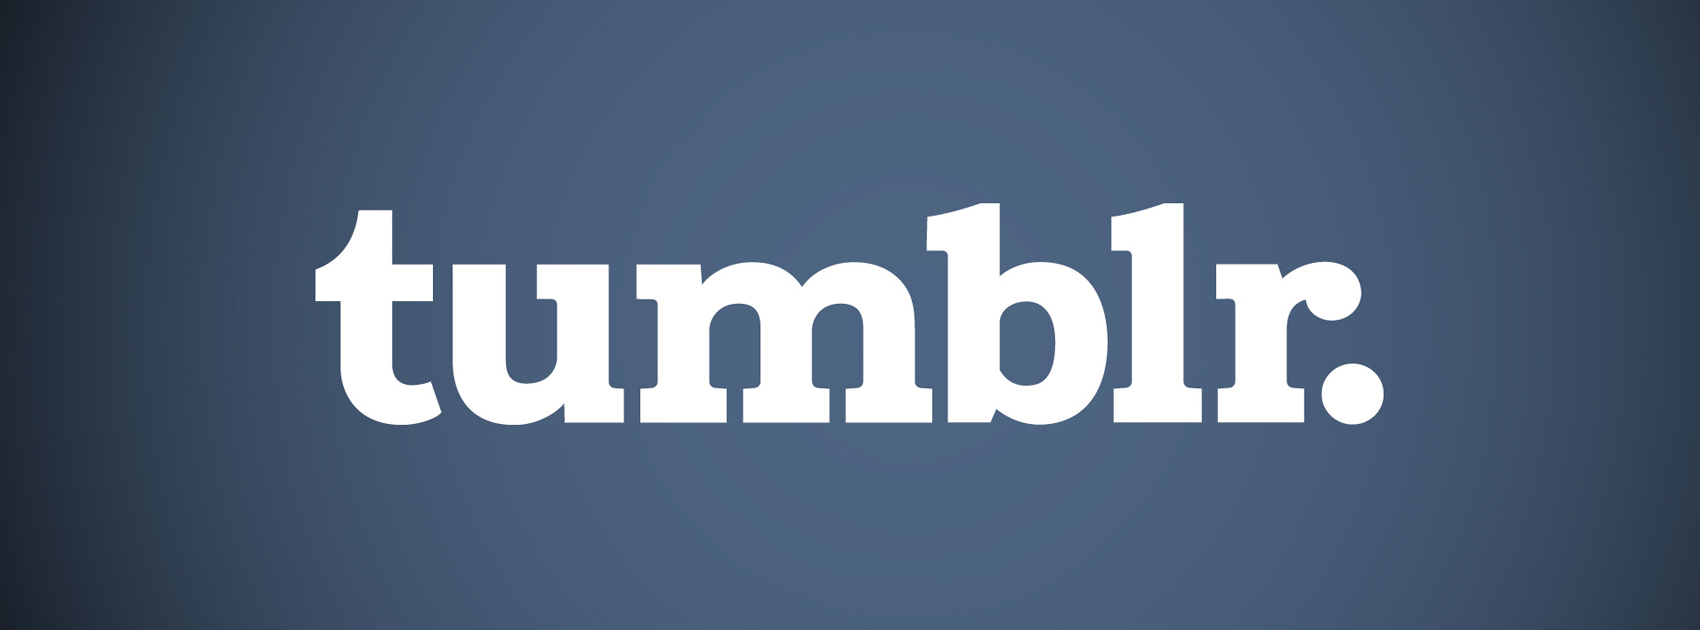 Inception Of Tumblr,Startup Stories,Startup News India,Latest Business News 2018,Founder of Tumblr,Tumblr CEO David Karp,Tumblr Story Ideas,Tumblr Success Motivation,How Tumblr Works,Tumblr Blogging Success Story,Tumblr History